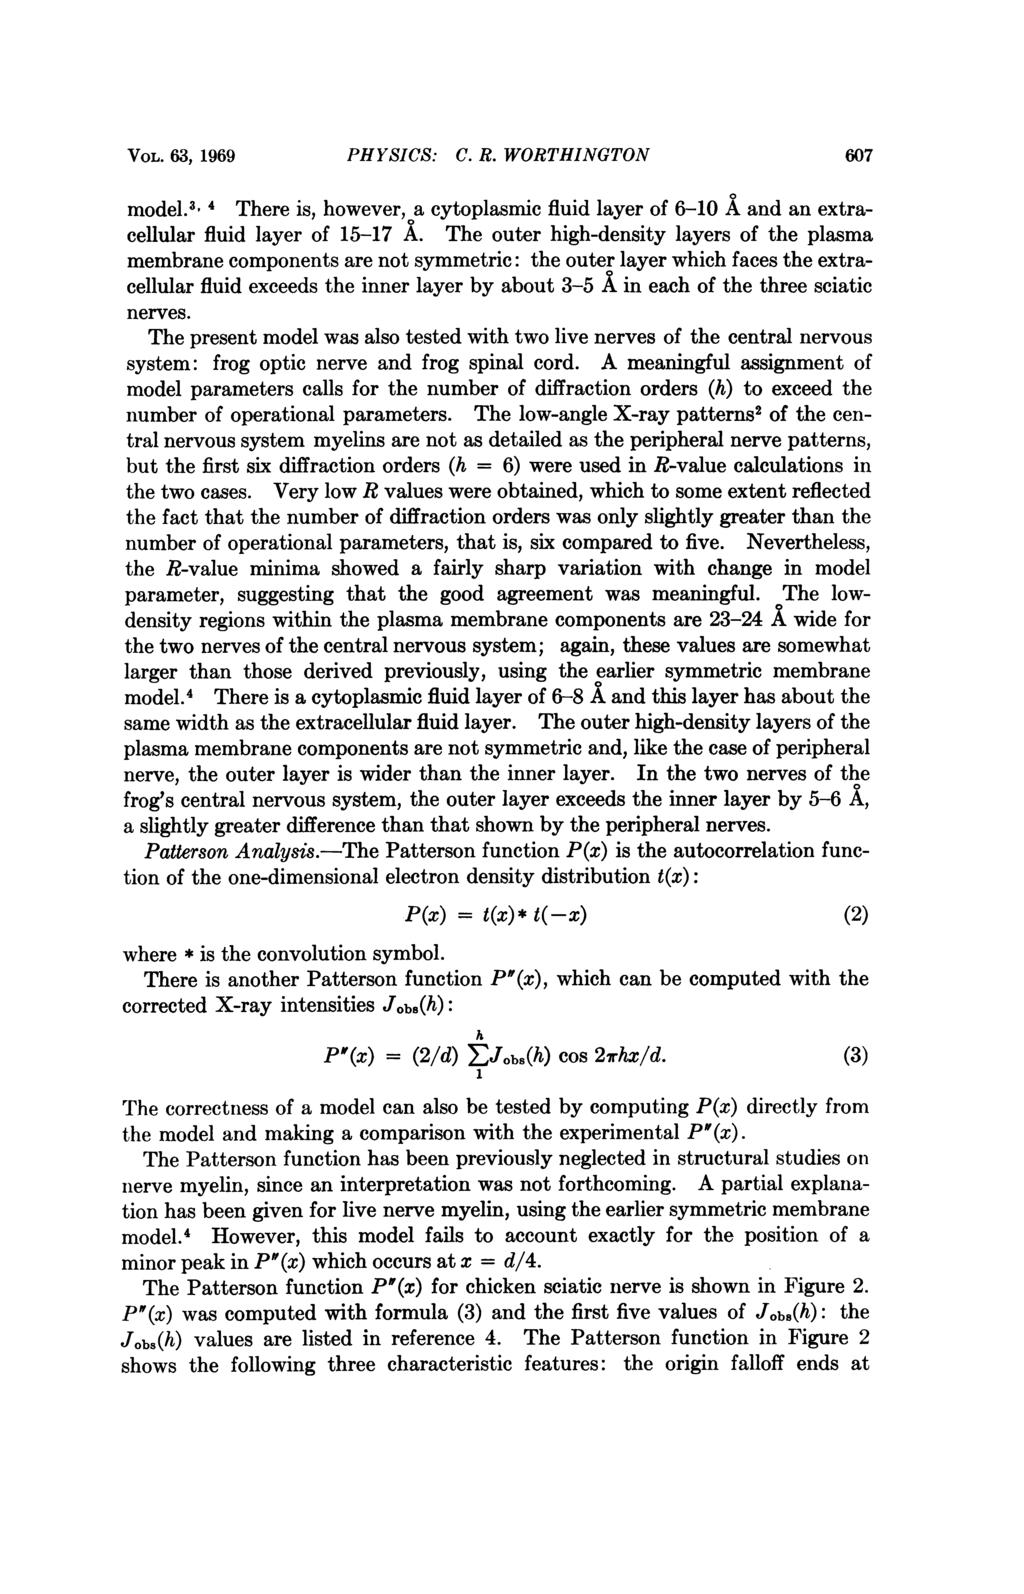 VOL. 63, 1969 PHYSICS: C. R. WORTHINGTON 607 model.' 4 There is, however, a cytoplasmic fluid layer of 6-10 A and an extracellular fluid layer of 15-17 A.